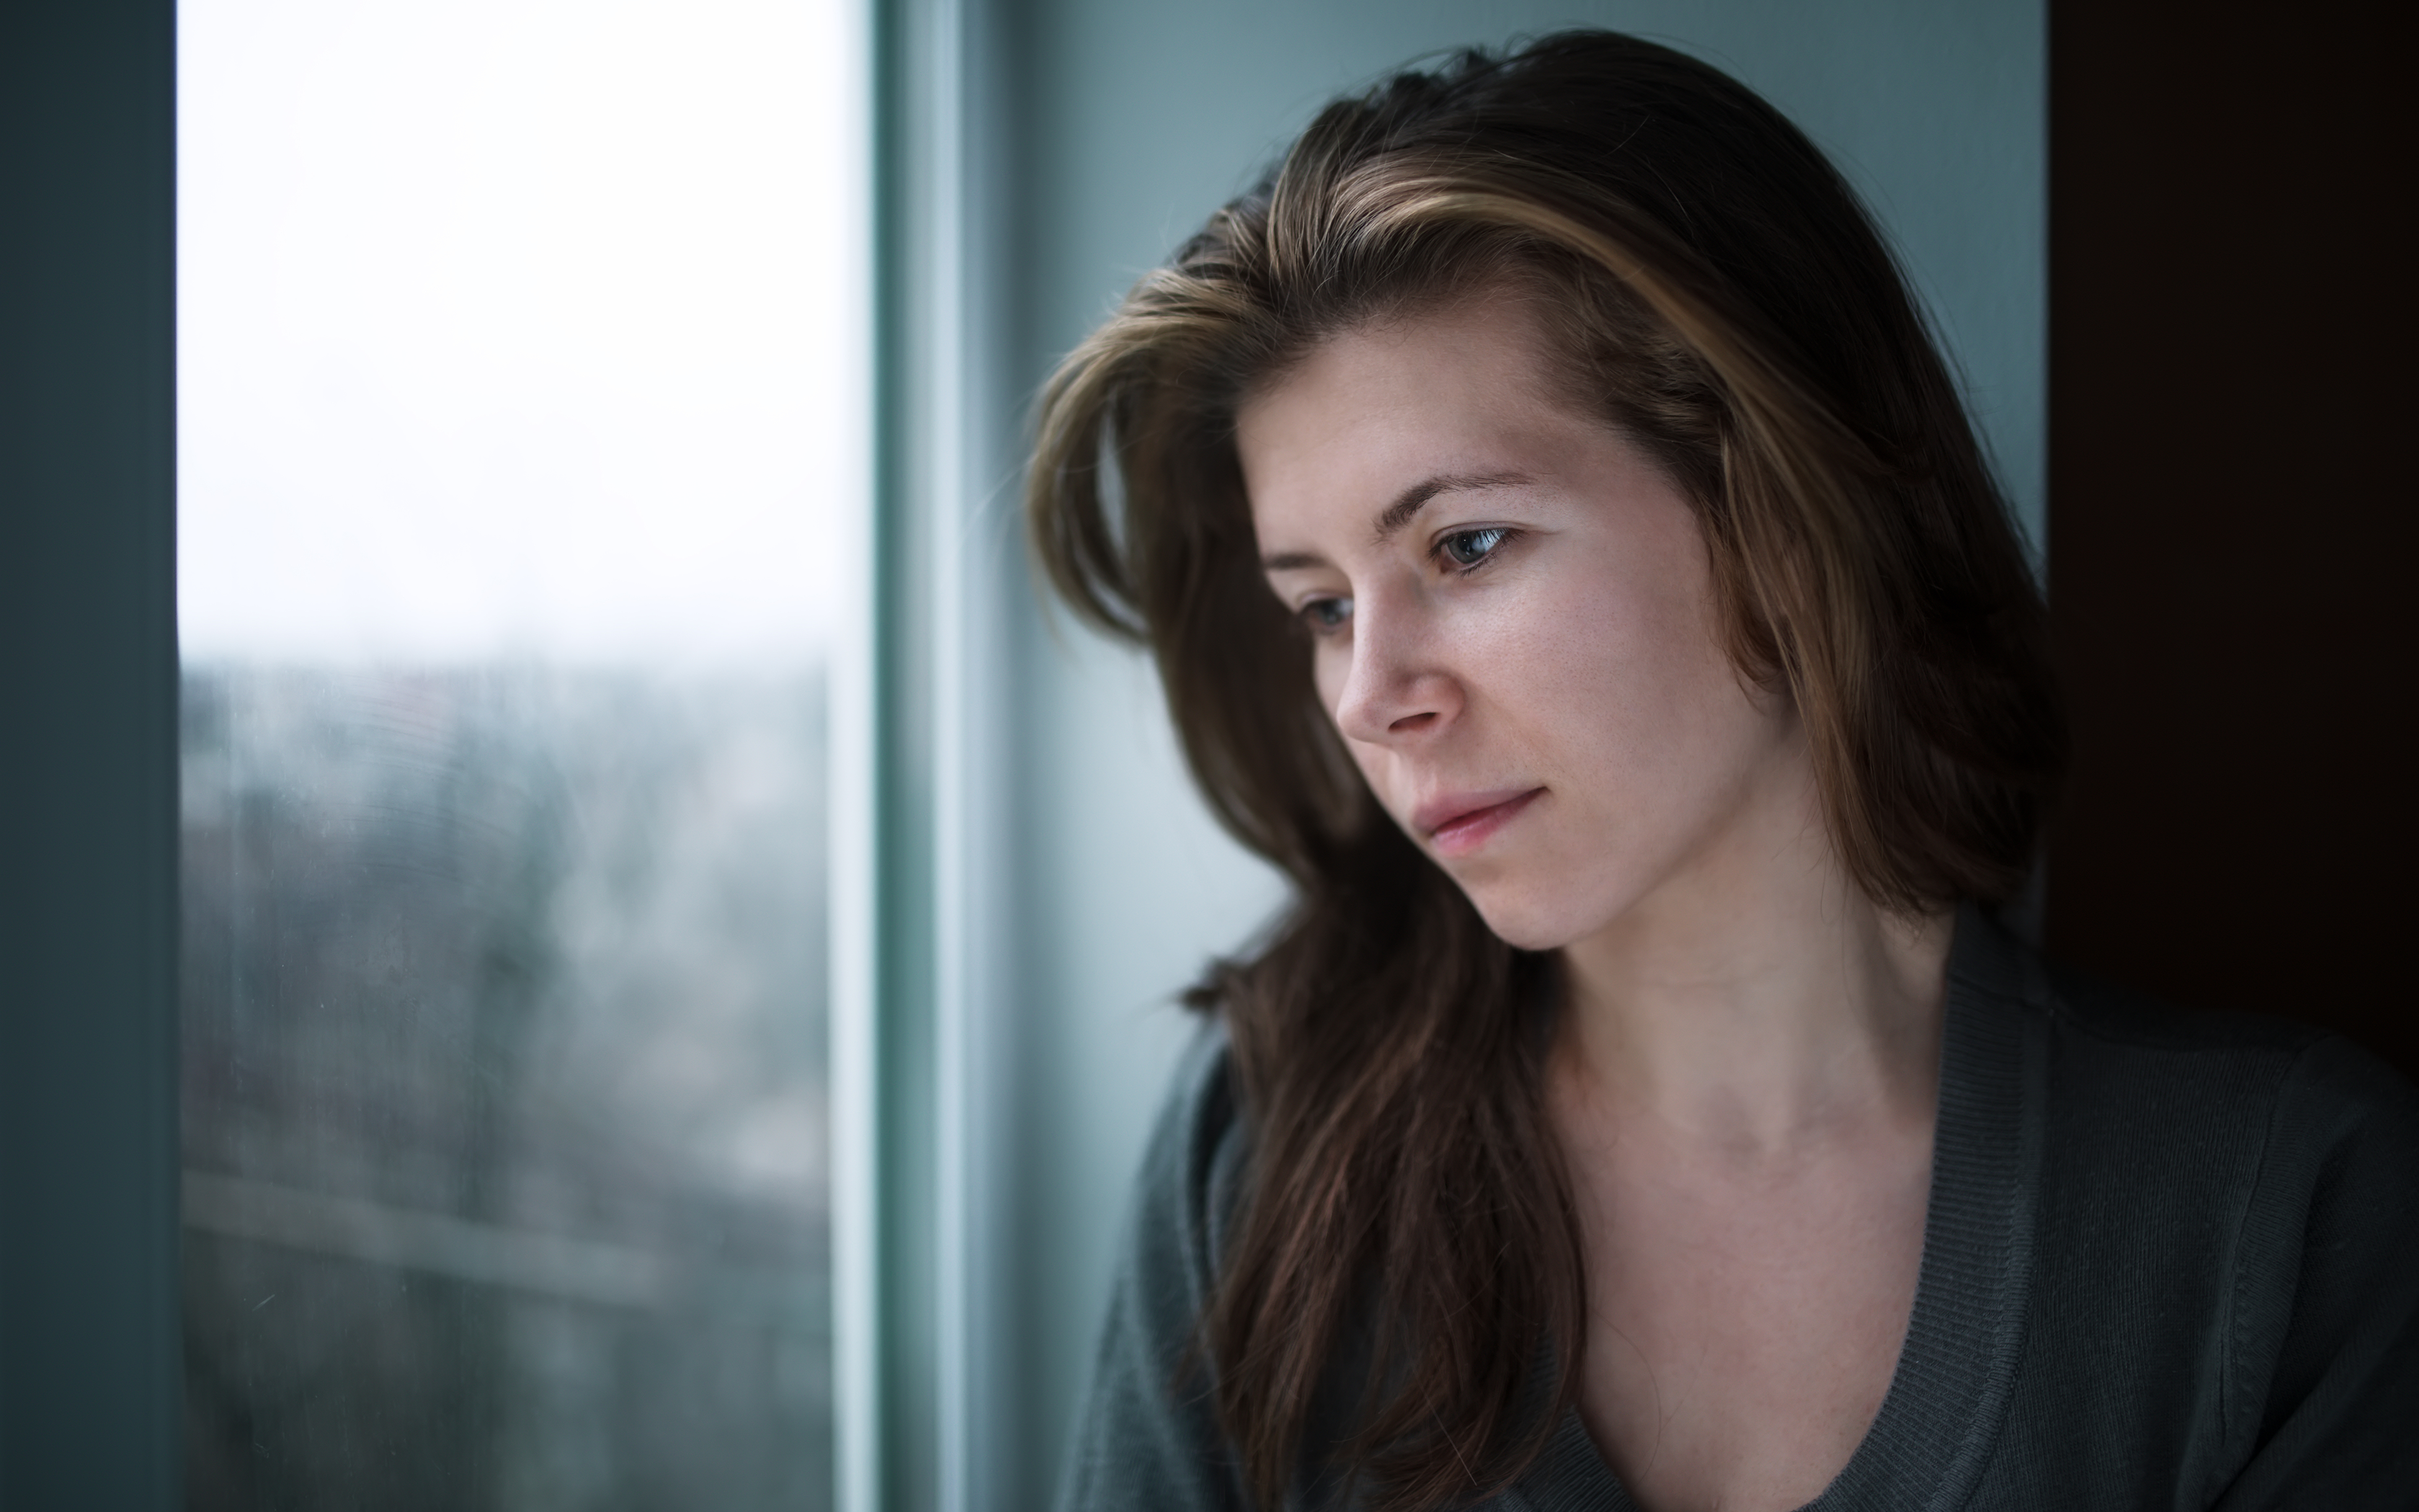 depressed woman staring blankly out the window